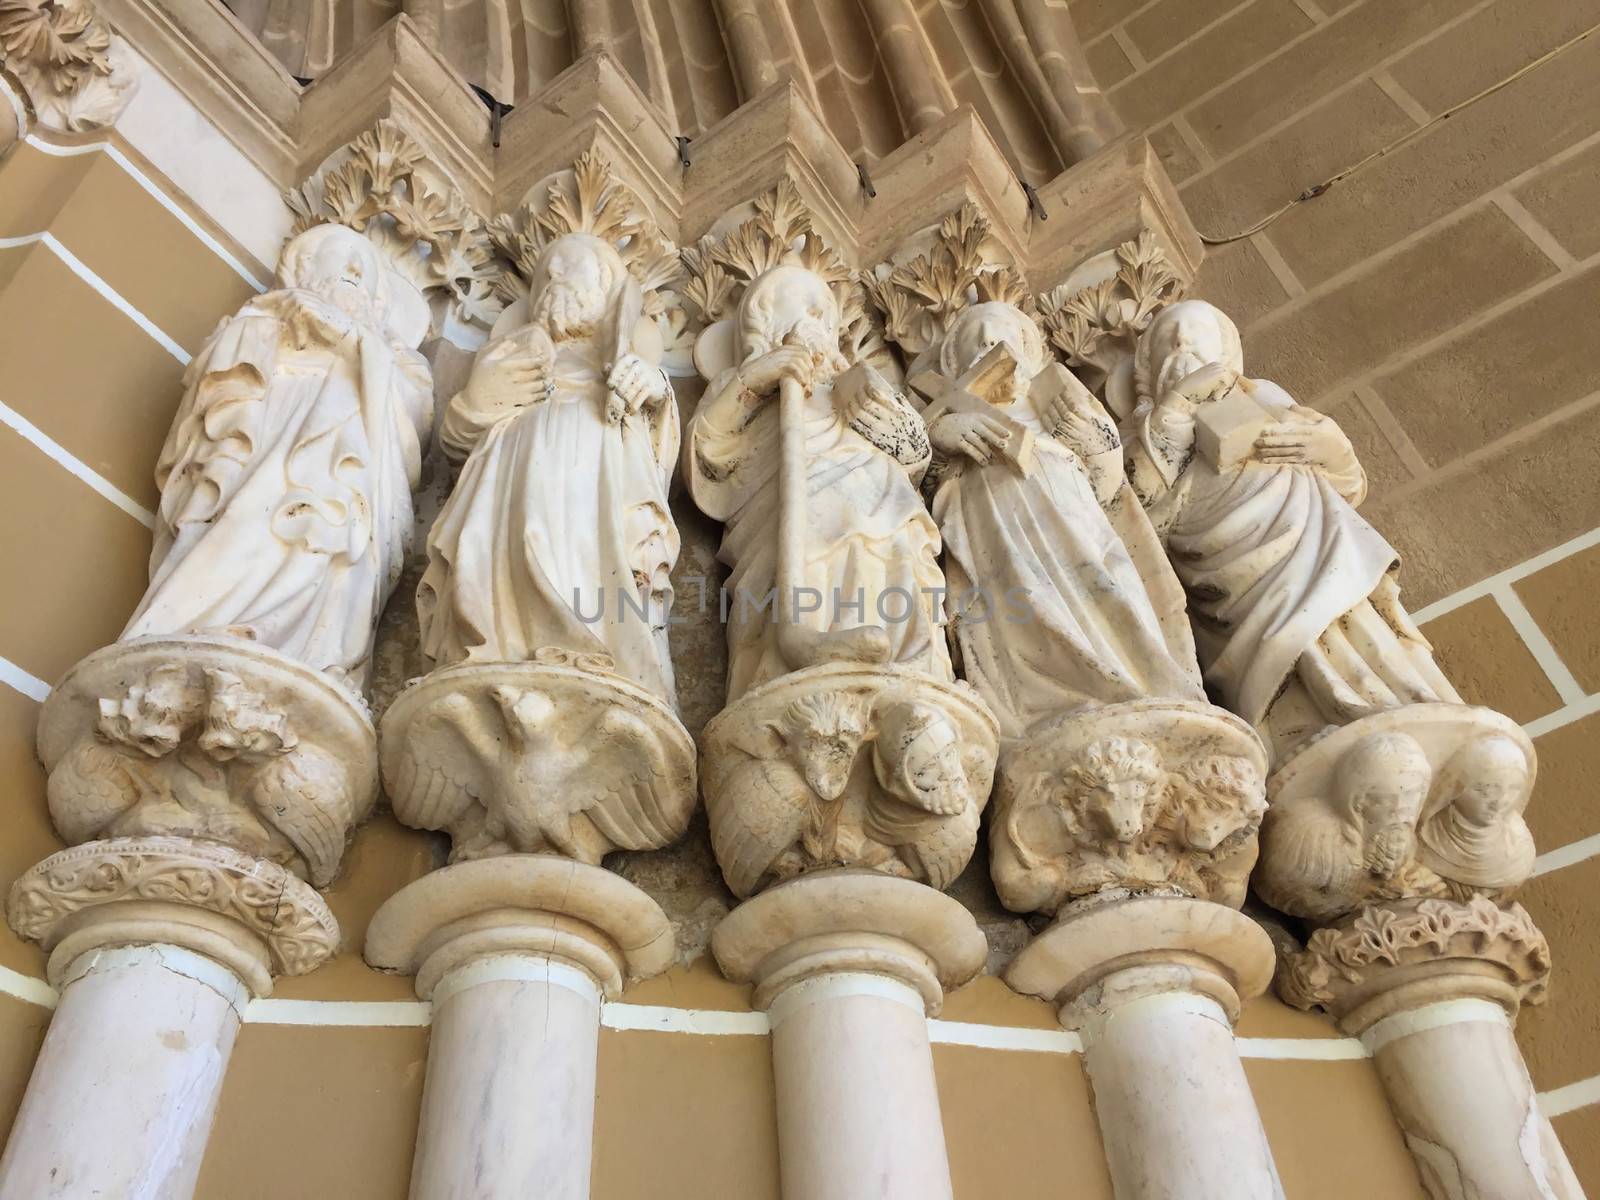 Fourteenth century statues of five apostles rise on columns at the entrance to the cathedral in Évora, Portugal. Low-angle image shot in natural light shows lovely color and detail of figural bases.